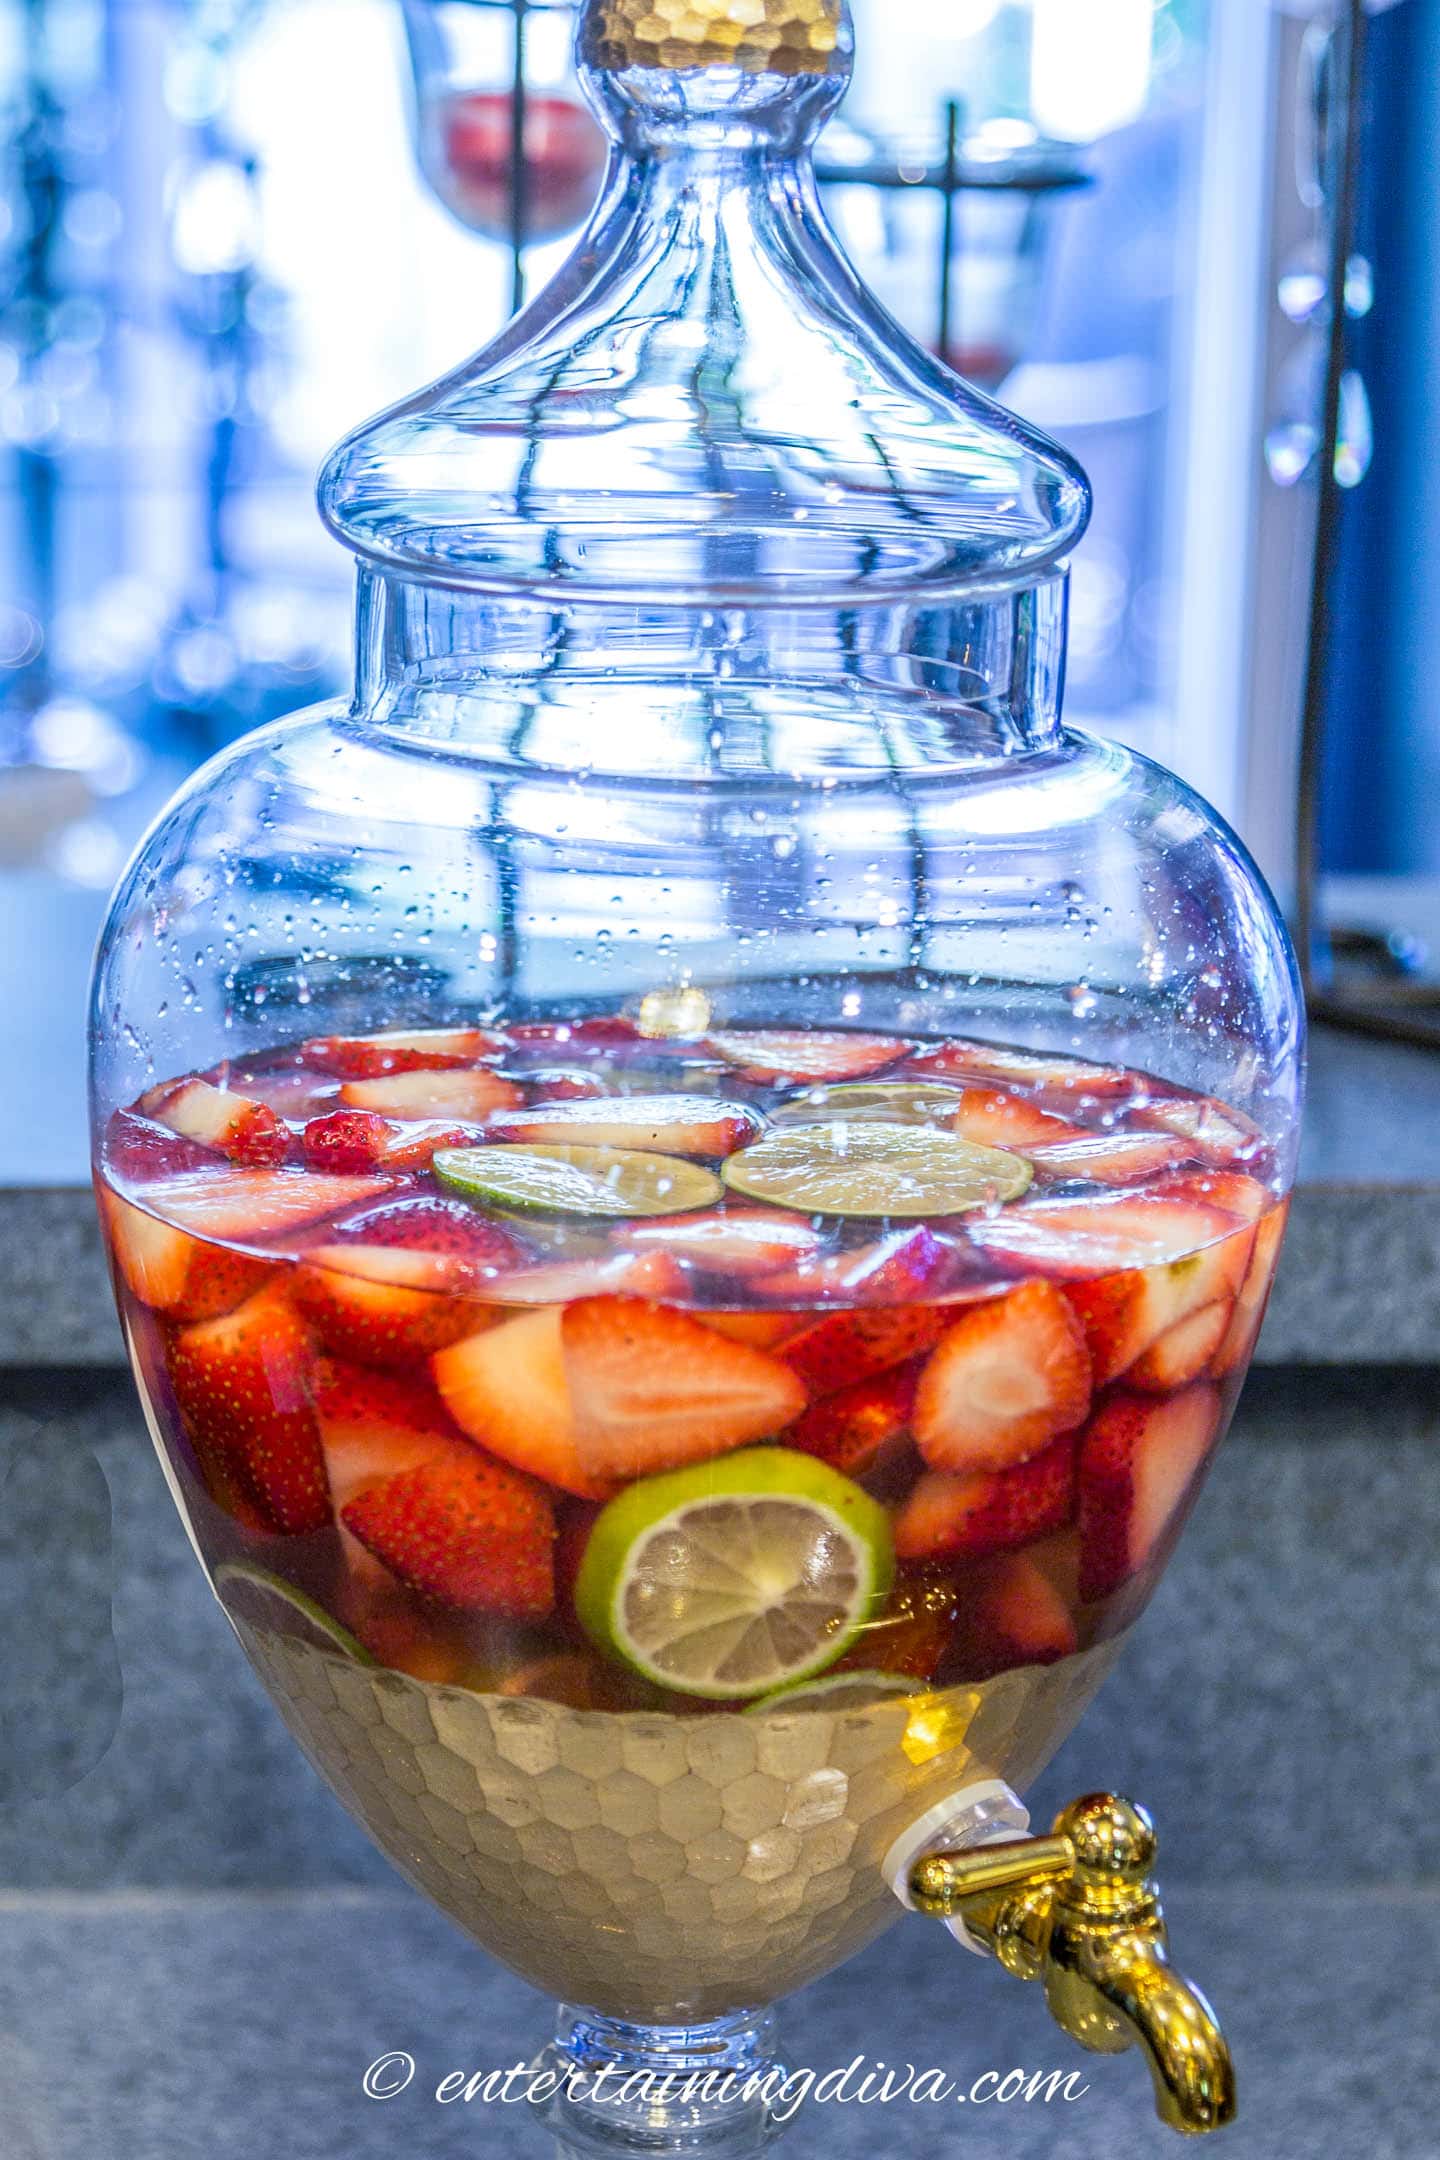 berries, limes and rose wine in a drink dispenser